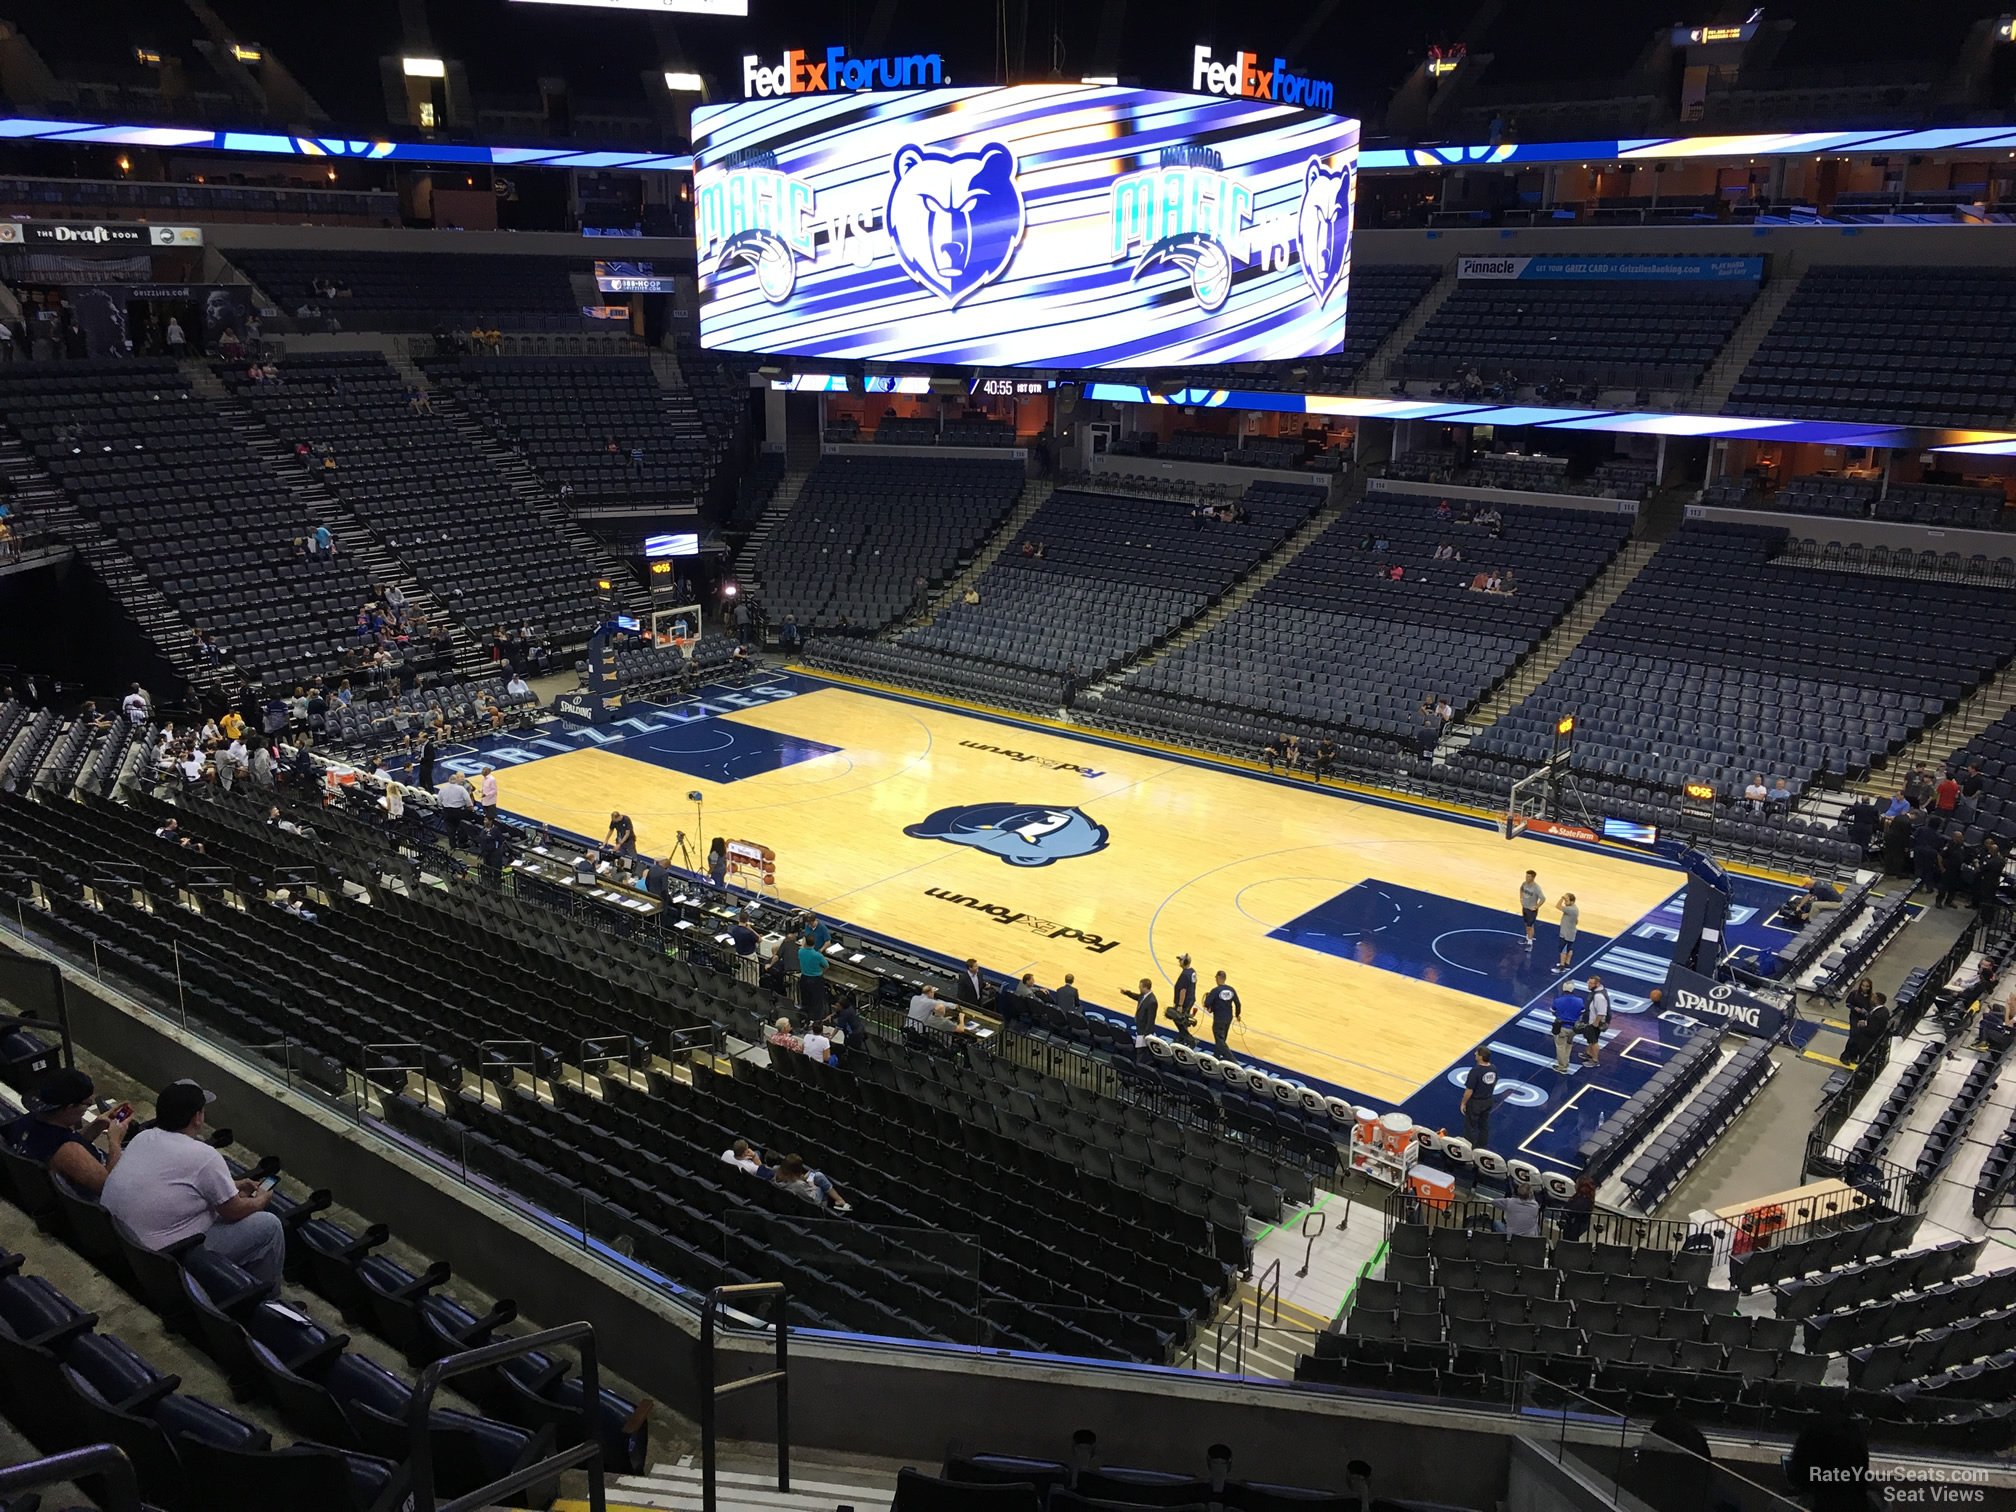 section p7, row h seat view  for basketball - fedex forum